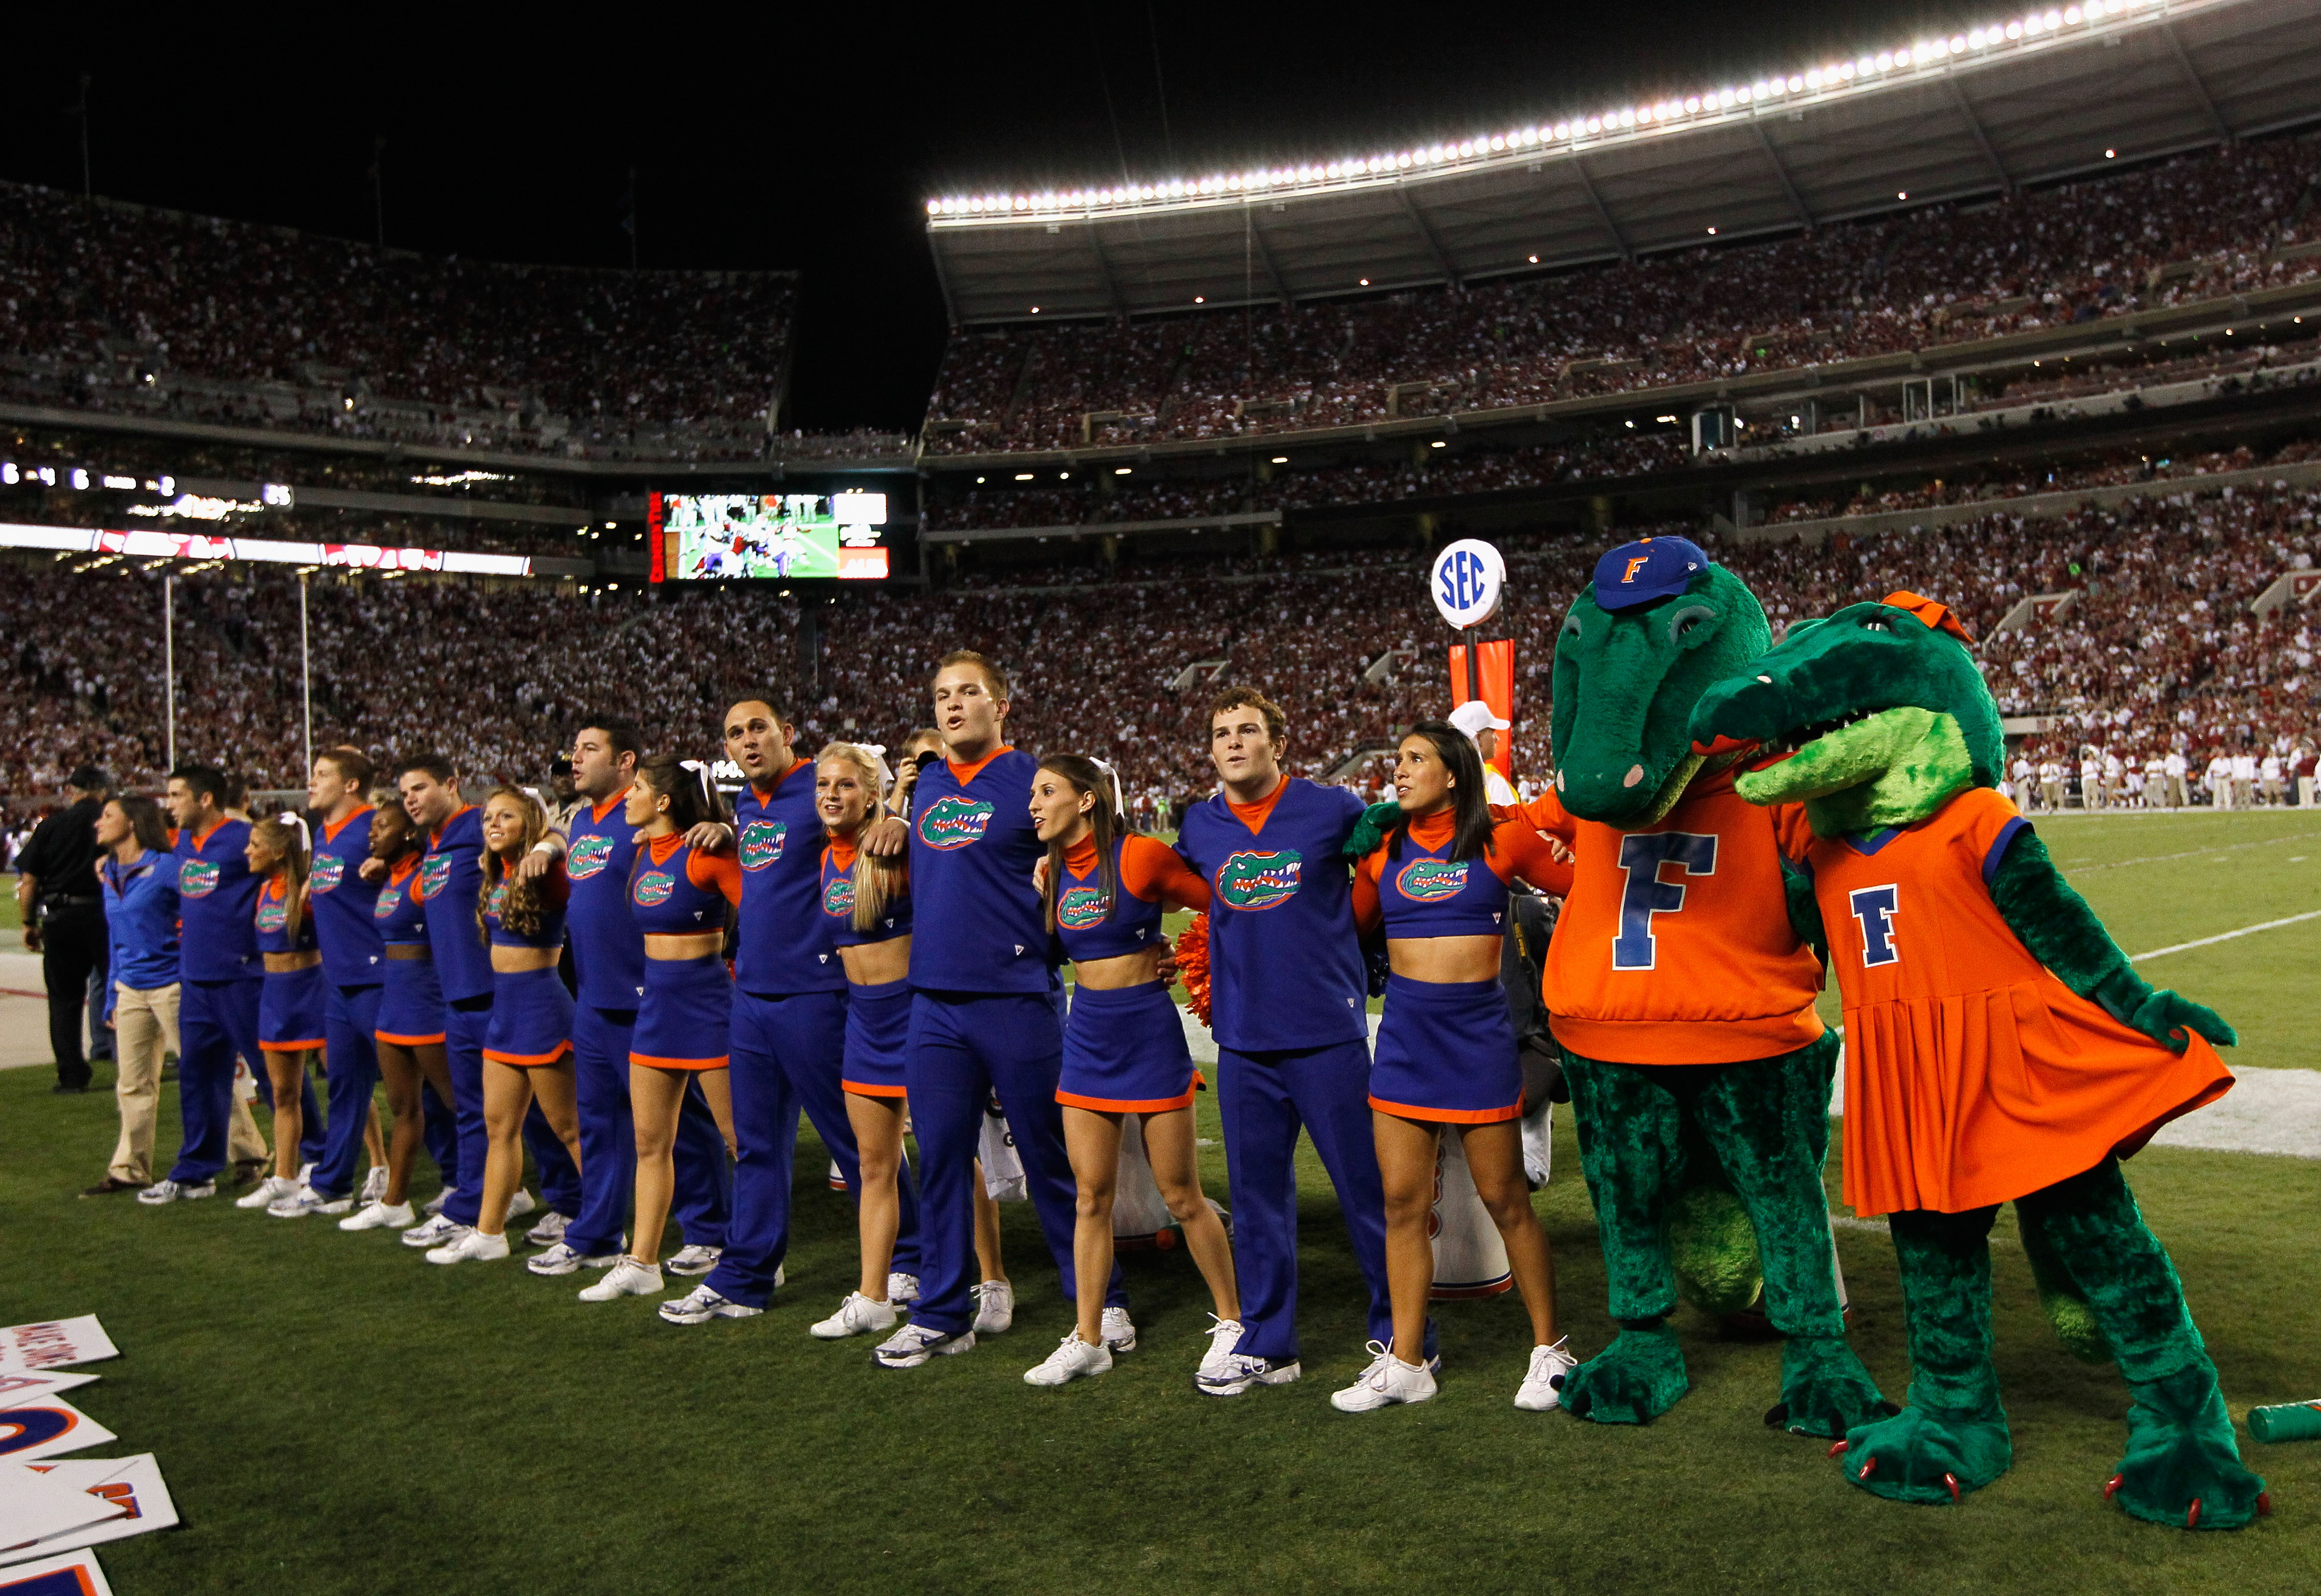 TUSCALOOSA, AL - OCTOBER 02:  Cheerleaders and mascots of the Florida Gators during the game against the Alabama Crimson Tide at Bryant-Denny Stadium on October 2, 2010 in Tuscaloosa, Alabama.  (Photo by Kevin C. Cox/Getty Images)